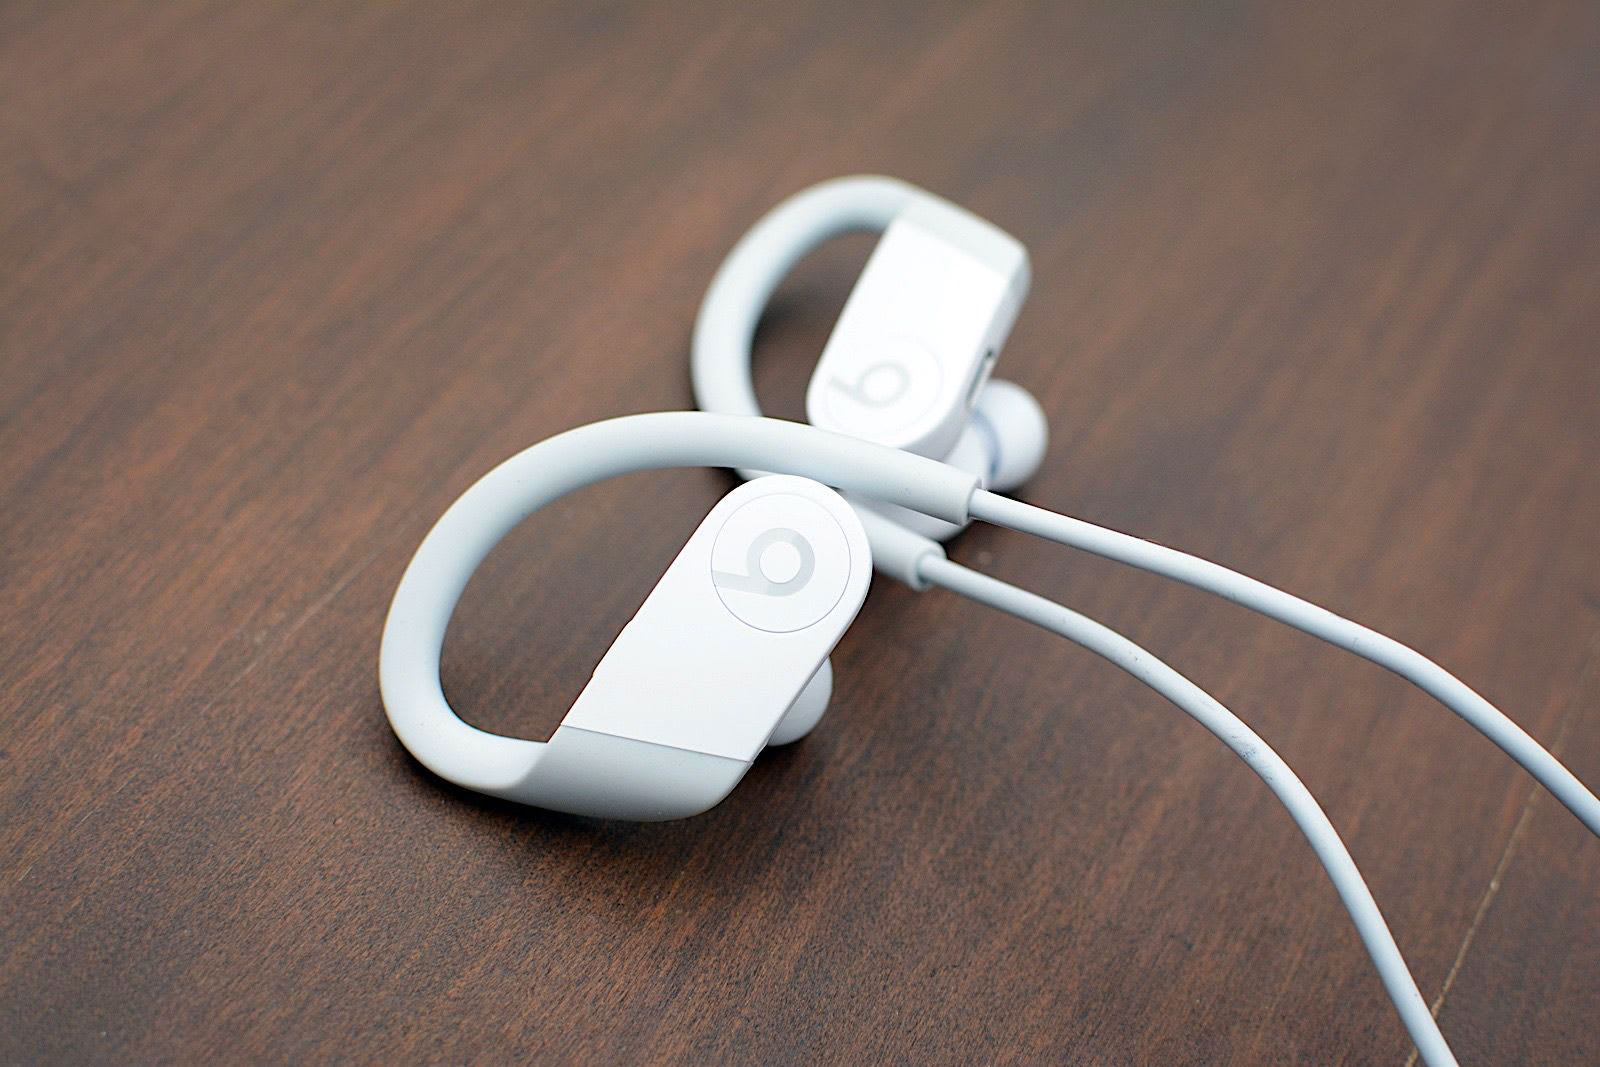 Powerbeats review: Better workout earbuds at a better price